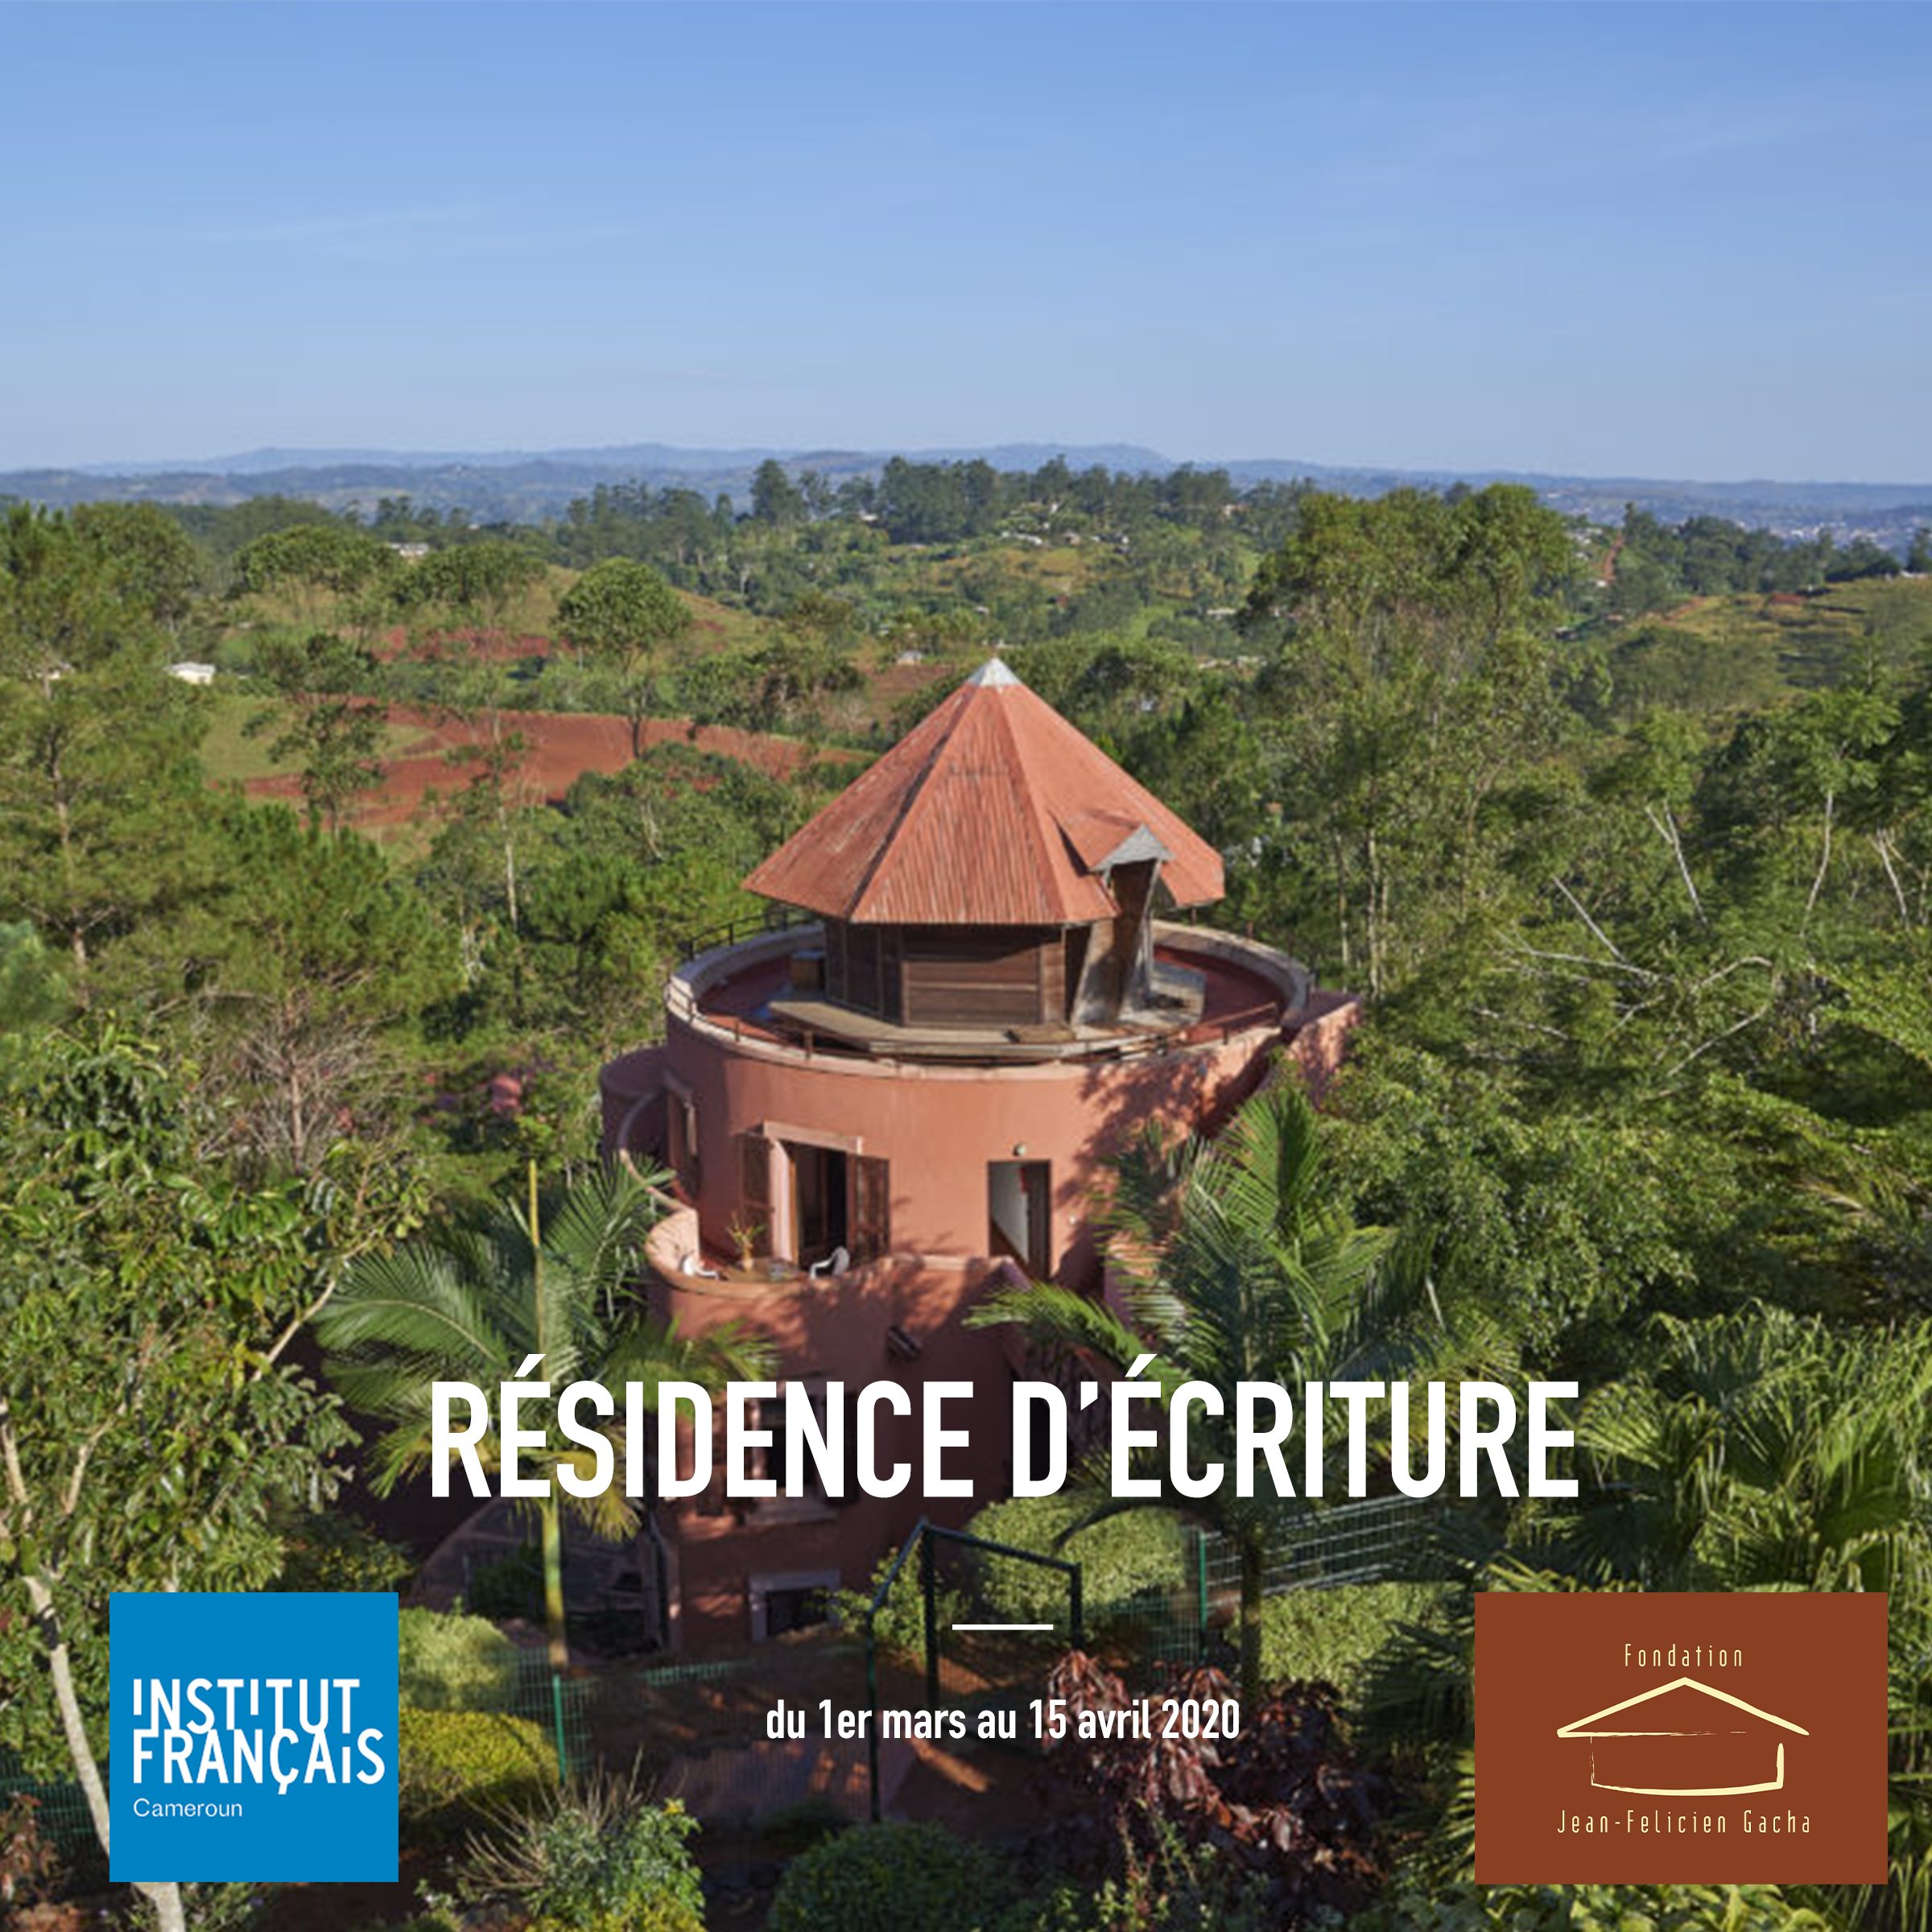 WRITING RESIDENCE  - CALL FOR CANDIDATURES FROM 15 JULY TO 10 OCTOBER 2019